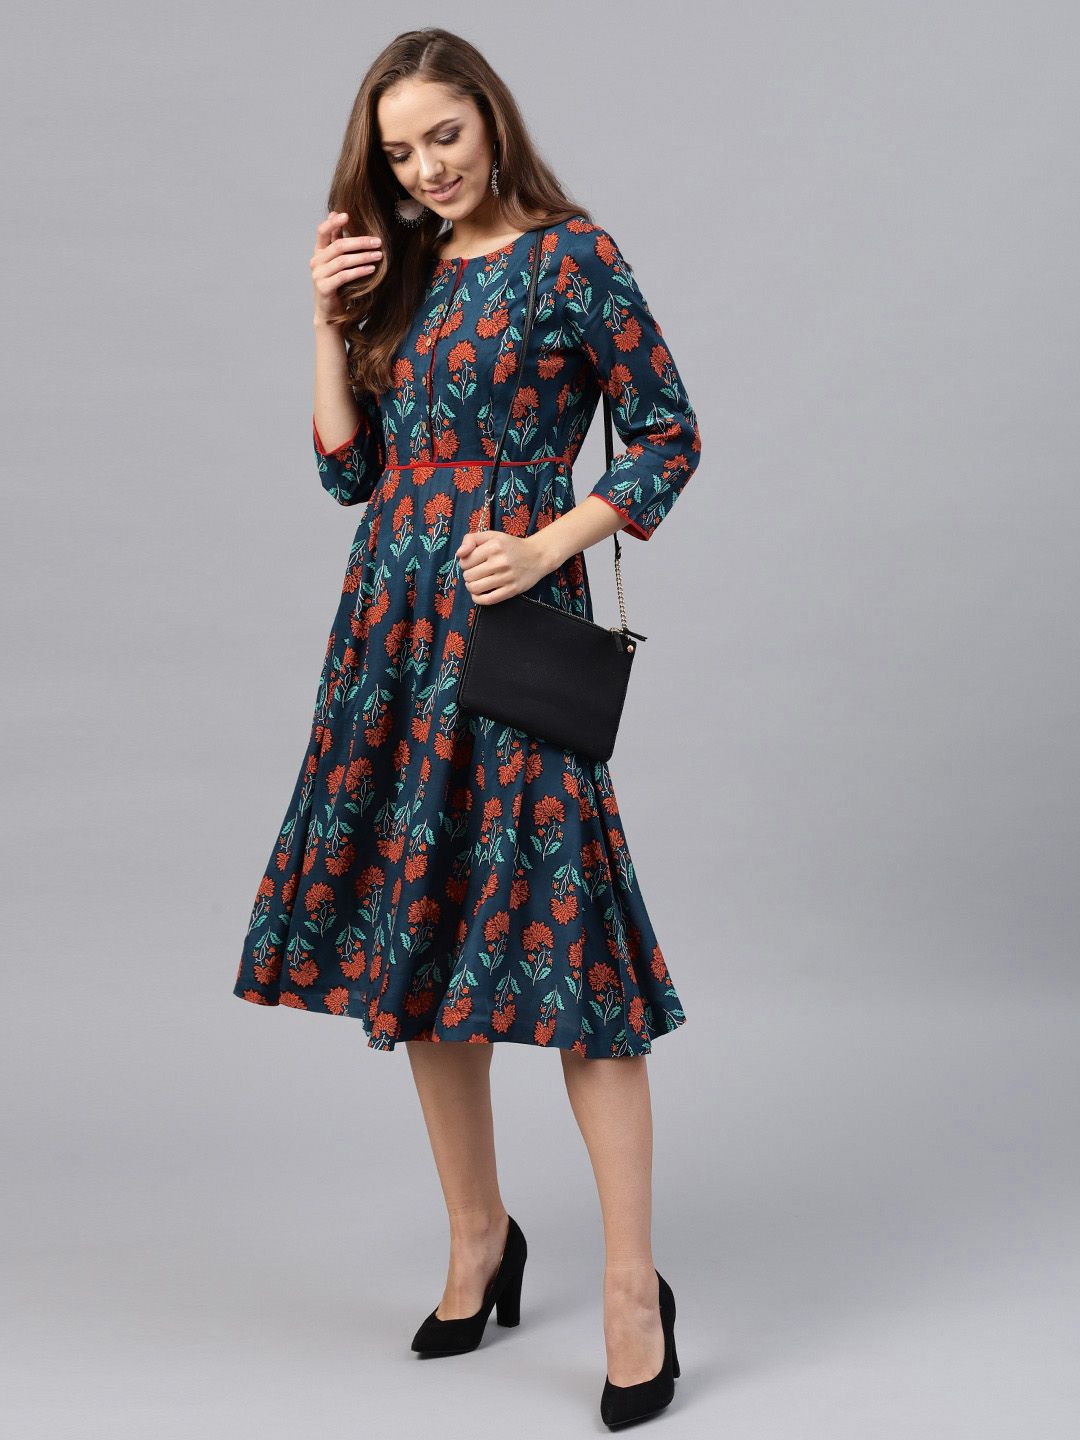 SASSAFRAS Teal Blue Floral Printed Fit & Flare Dress Price in India